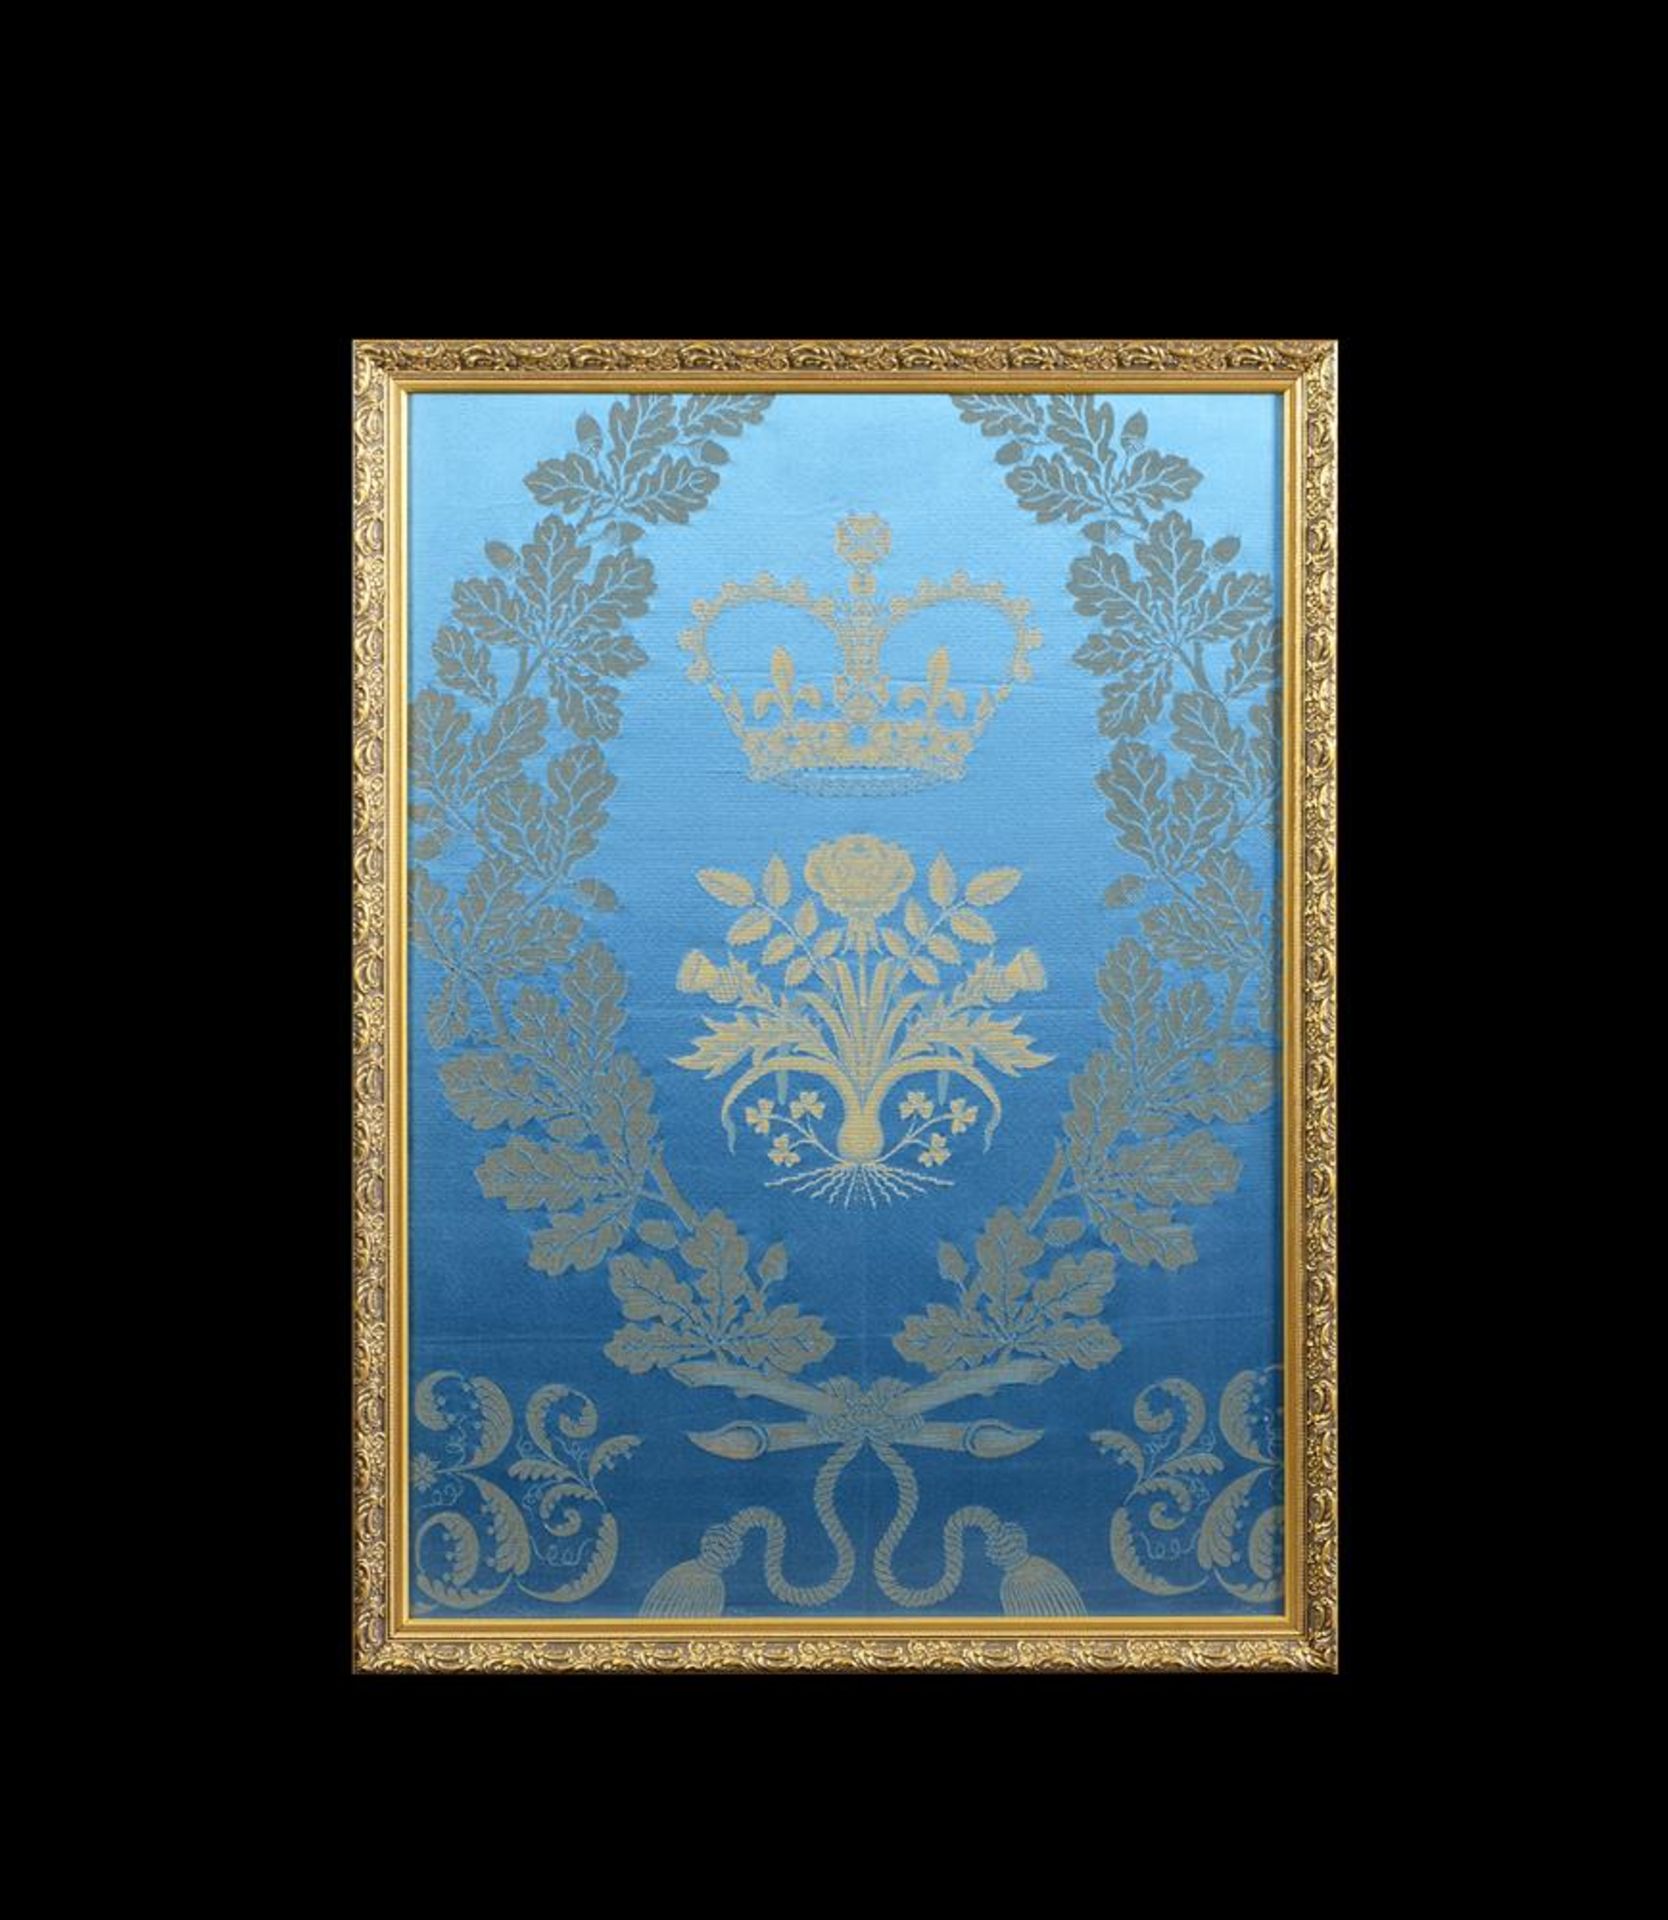 A FINE WOVEN SILK PANEL FROM THE CORONATION OF HER MAJESTY QUEEN ELIZABETH II, 1953 - Image 2 of 6